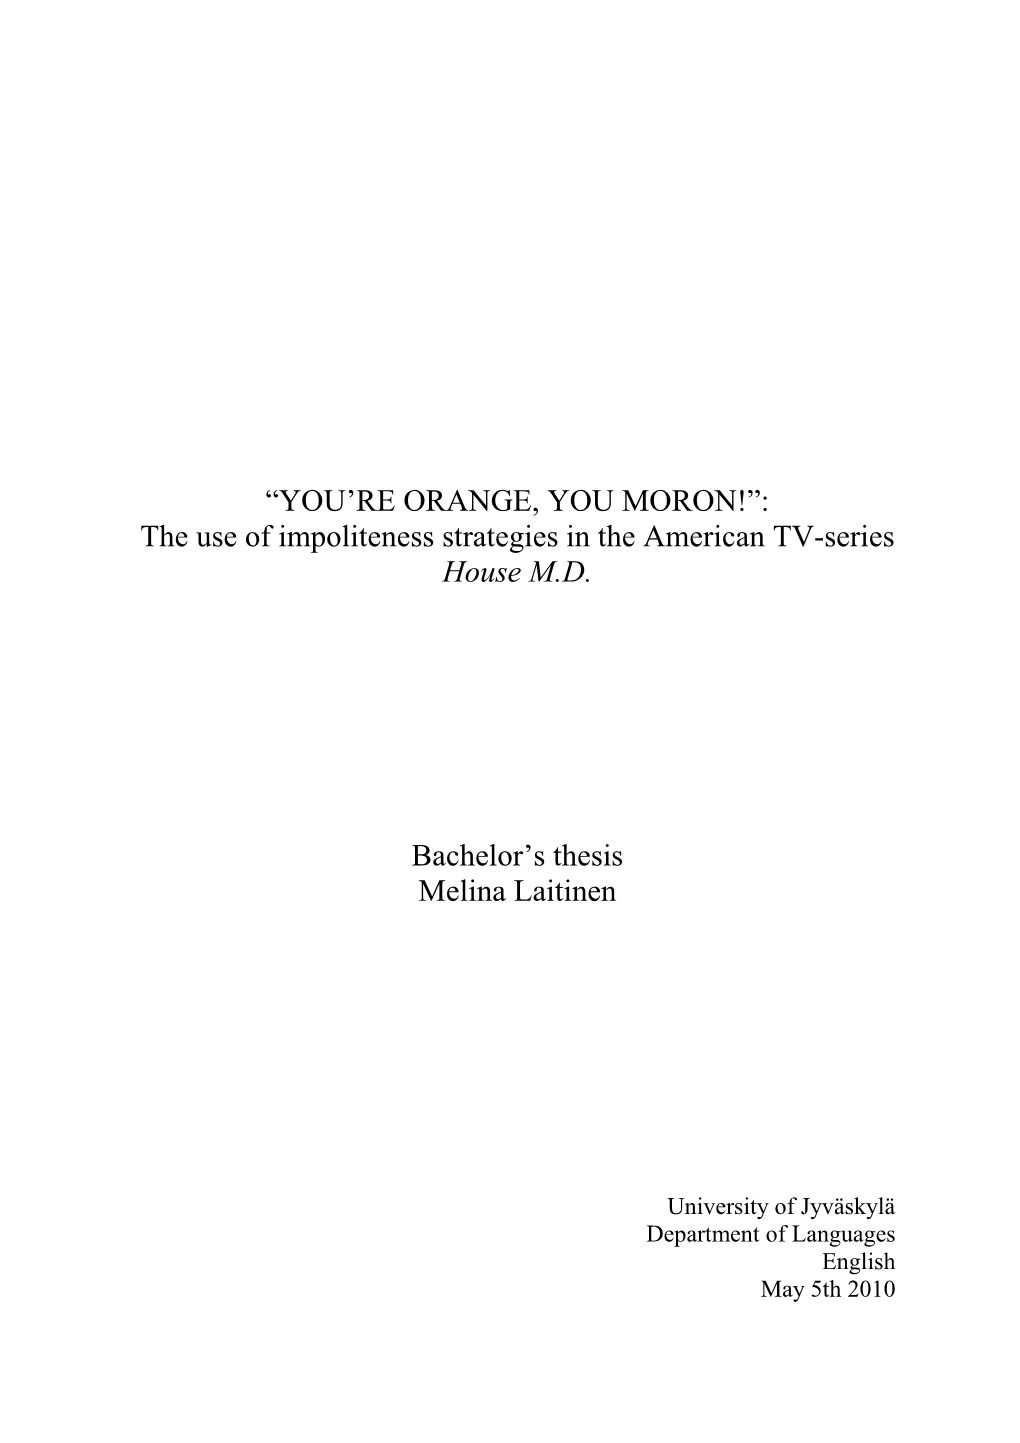 The Use of Impoliteness Strategies in the American TV-Series House MD